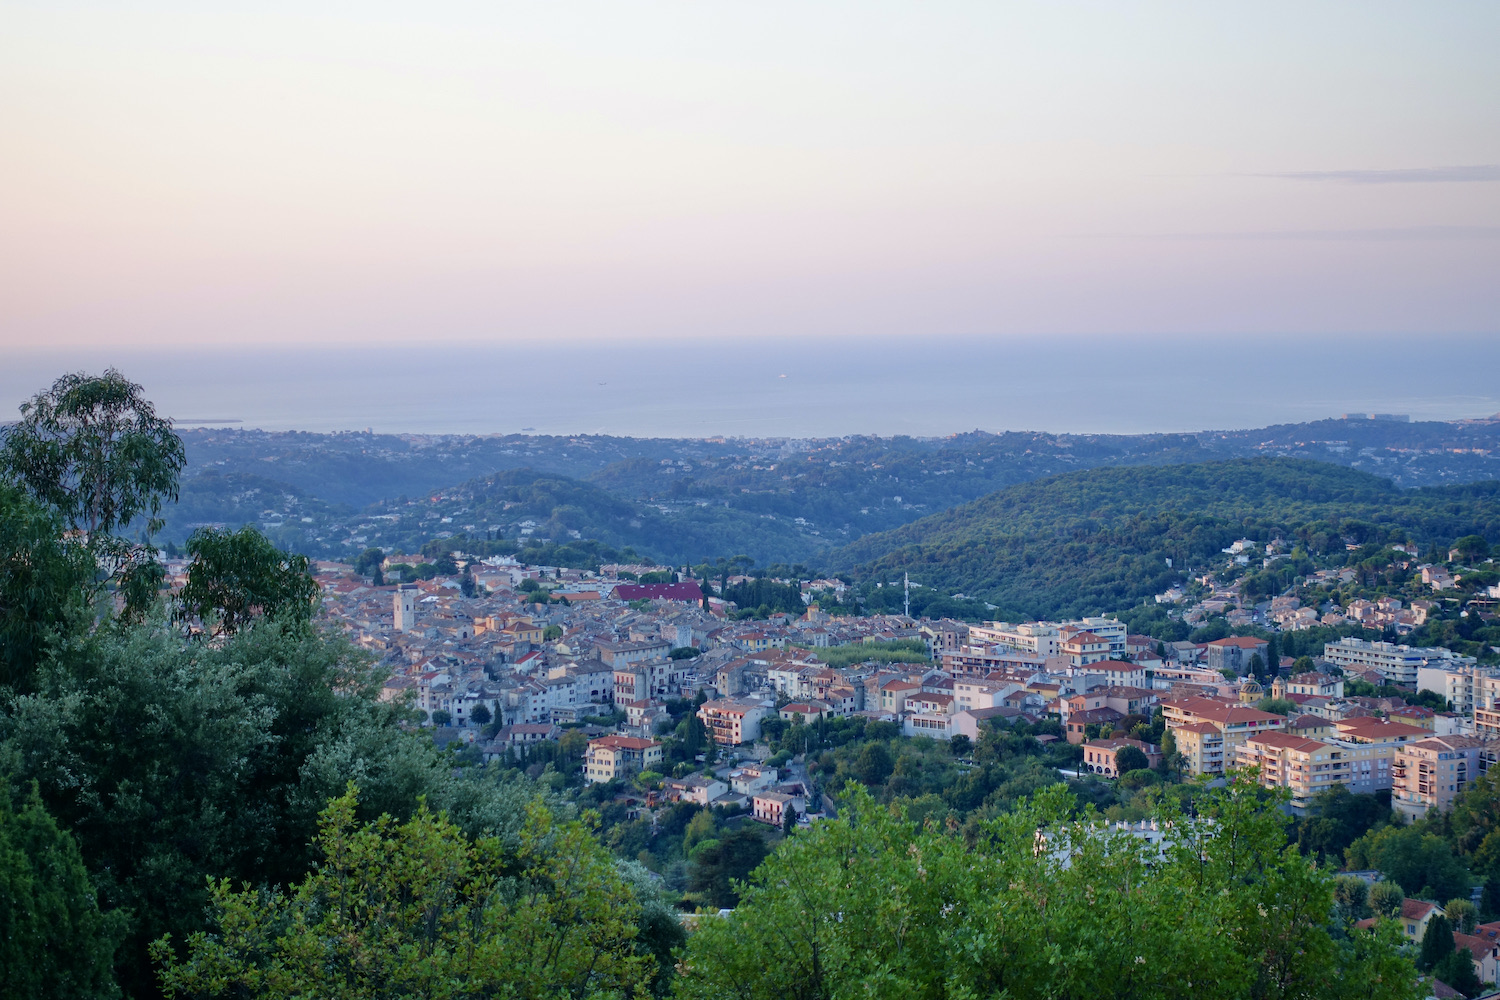 Château Saint-Martin in the French Riviera hills, view of Vence & the Mediterranean